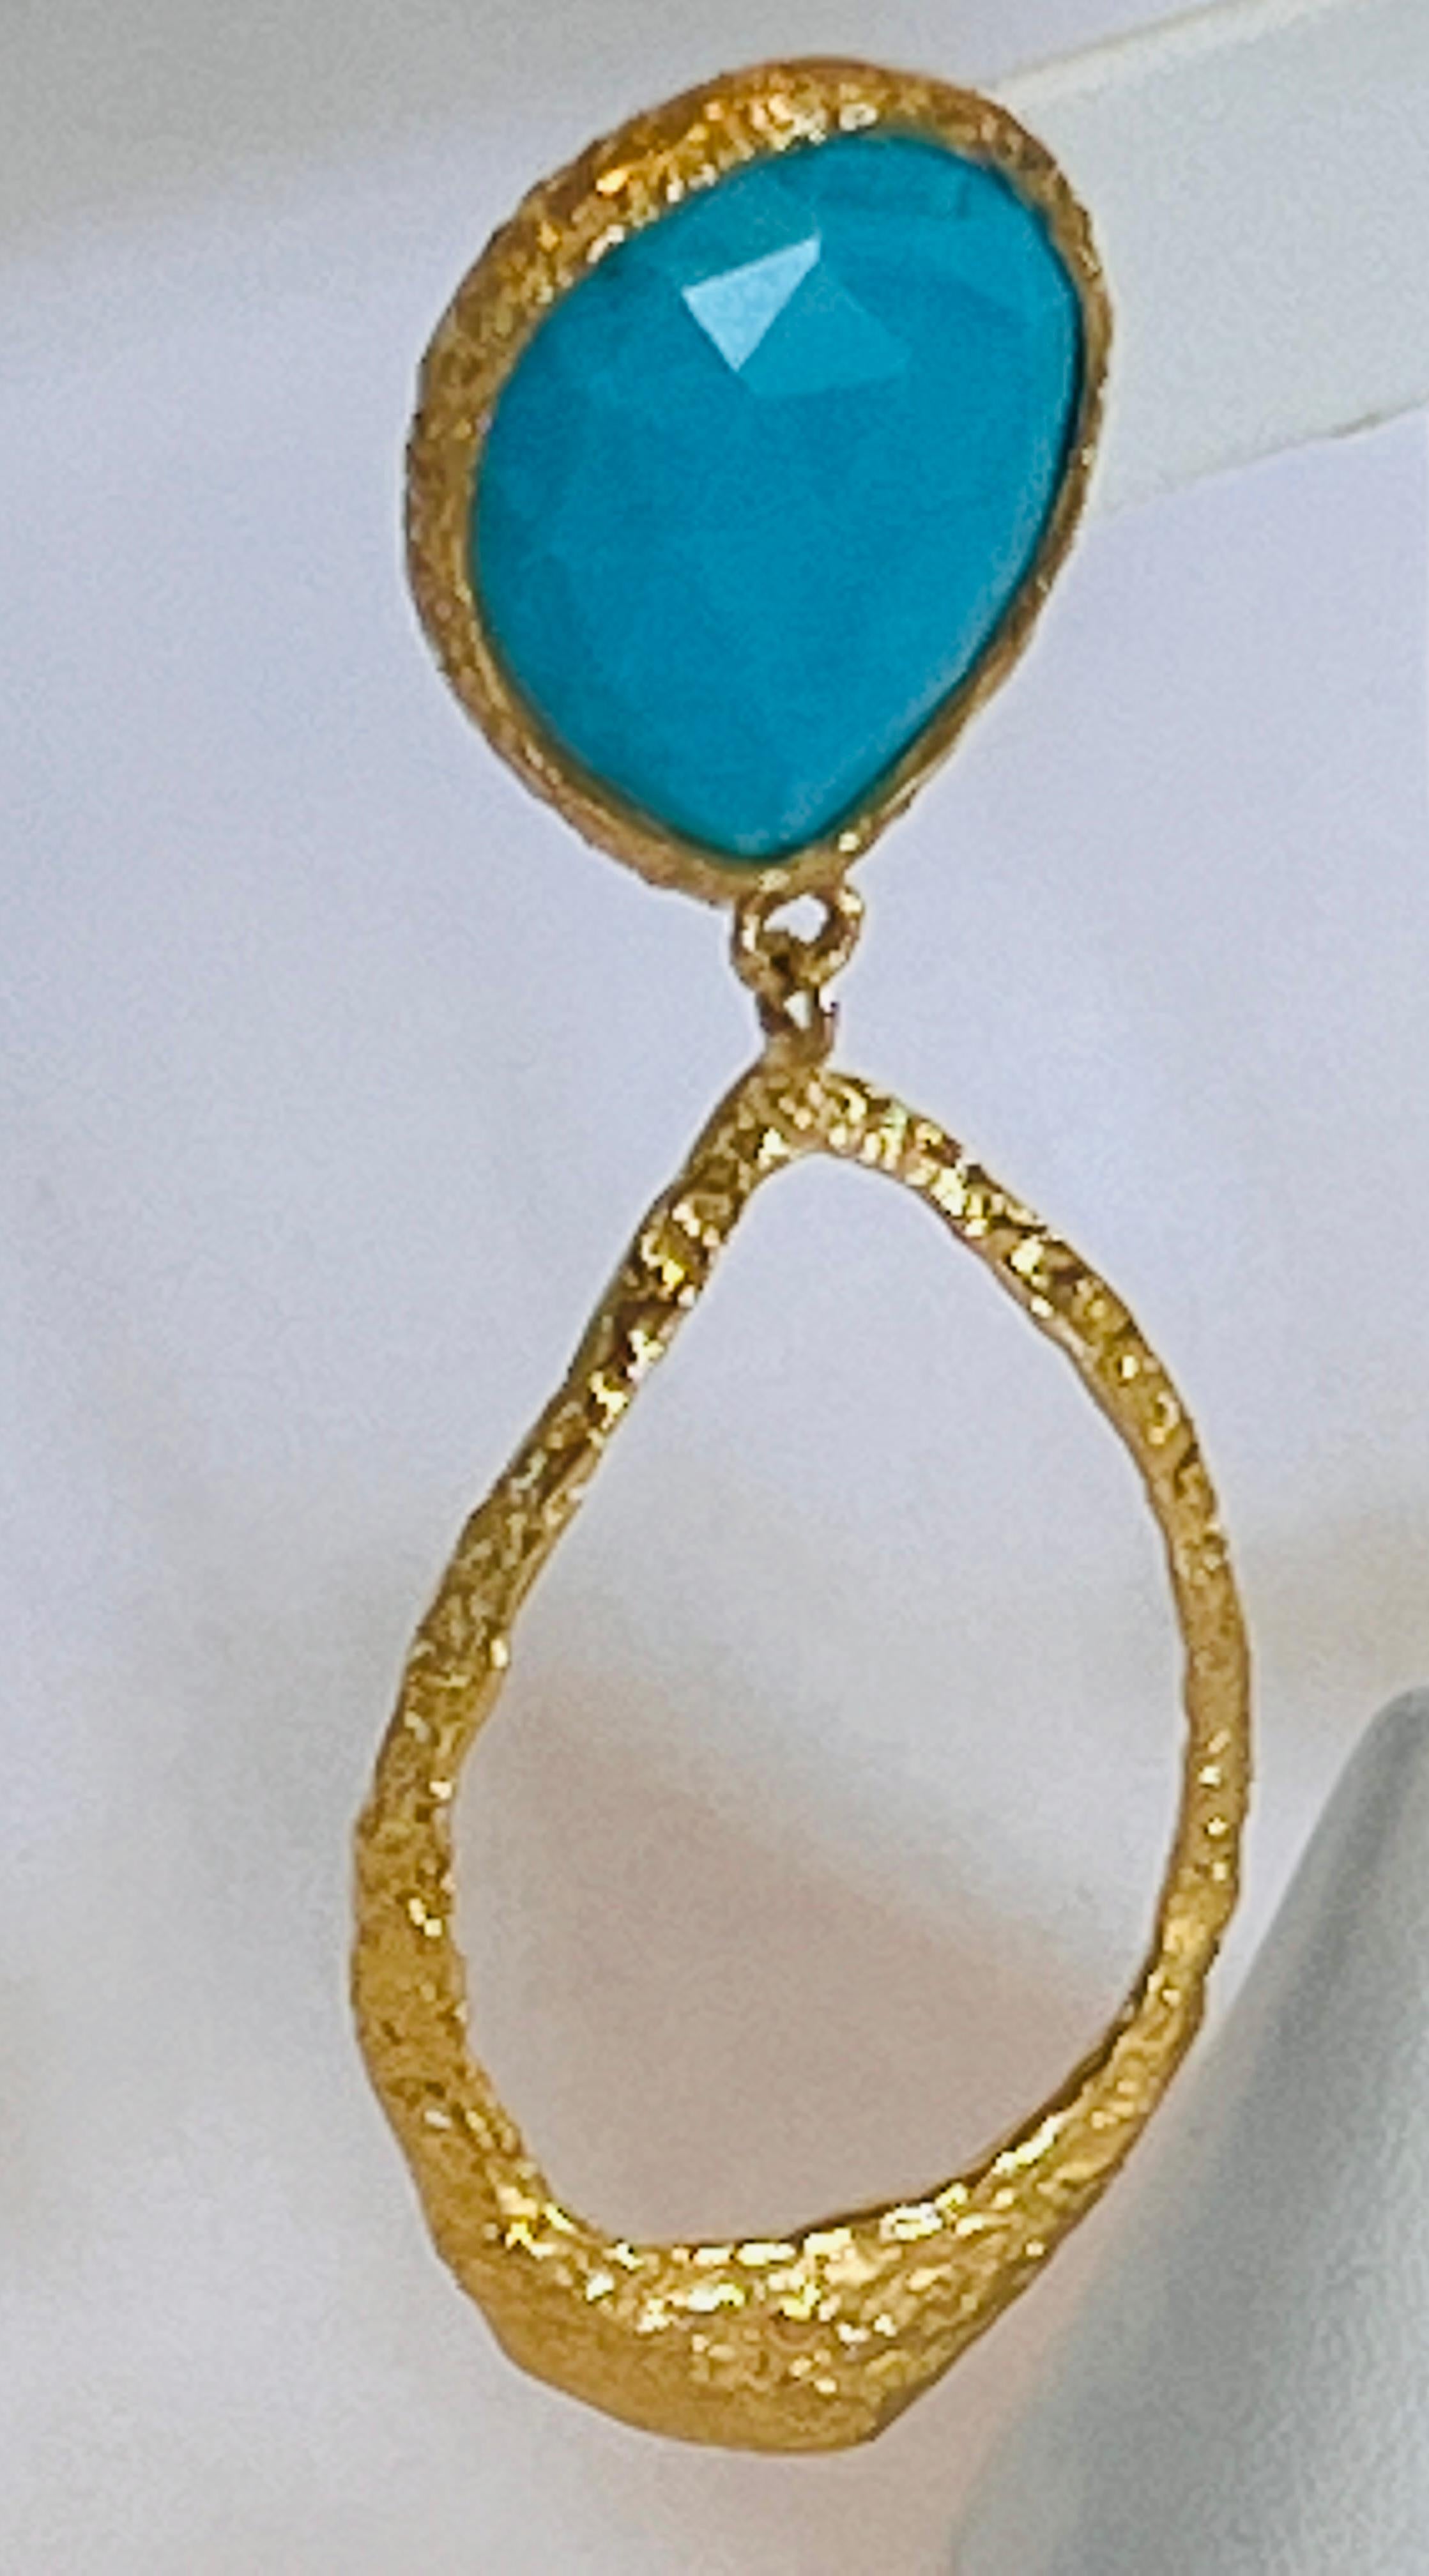 Women's Tagili Signature Teardrop Earrings with Turquoise in 22k Gold For Sale